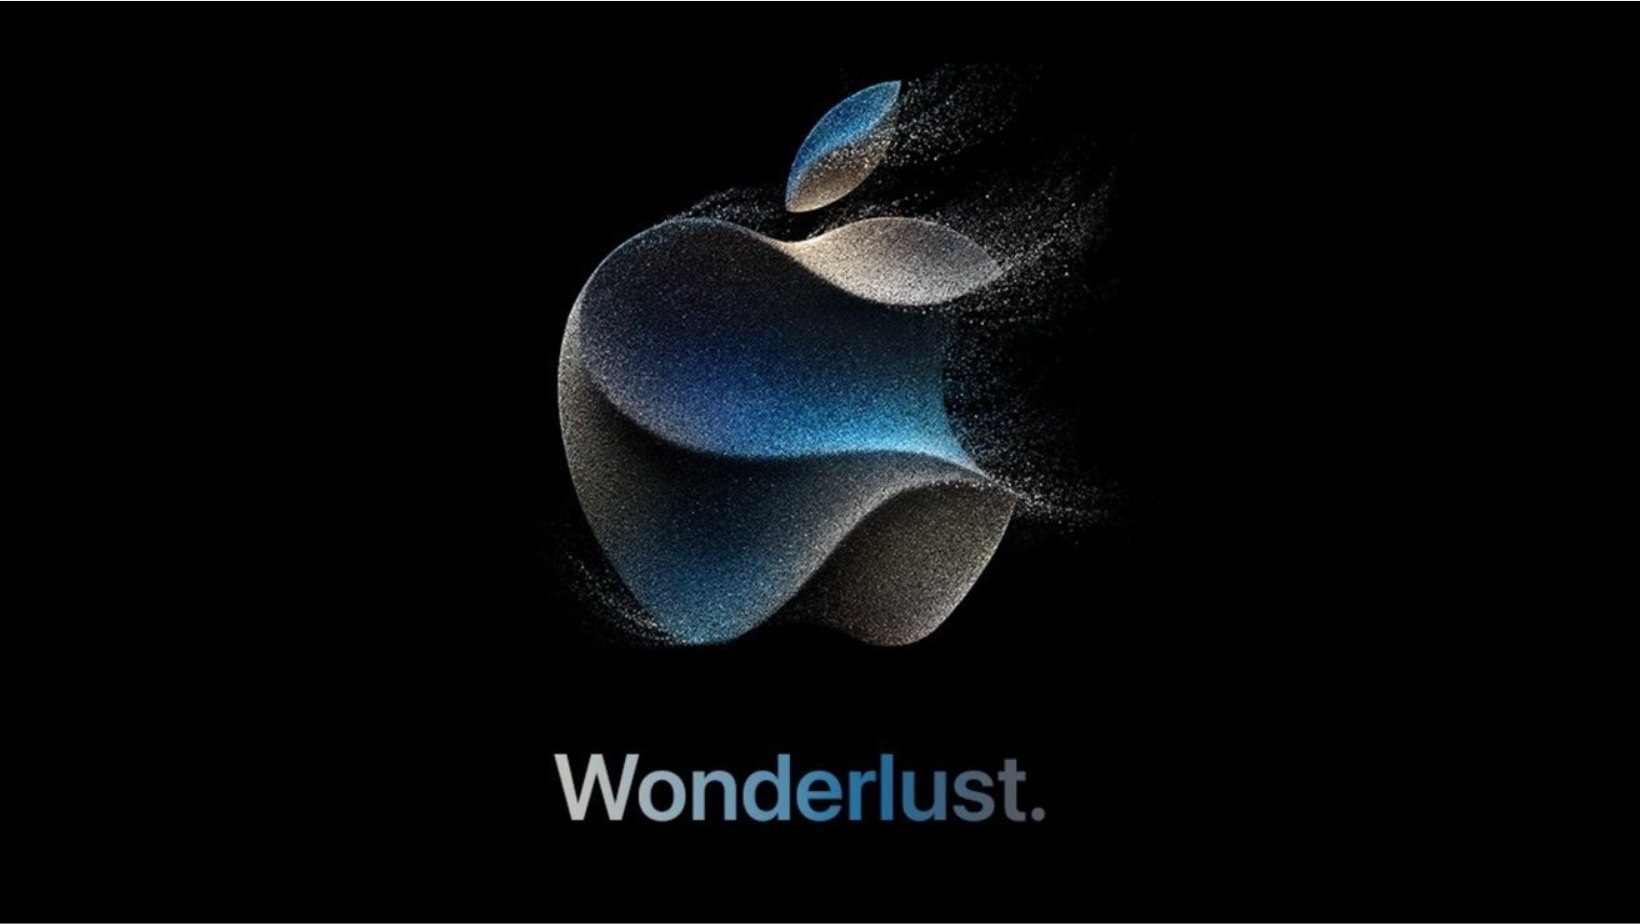 black background with Apple logo and text that reads "Wonderlust"